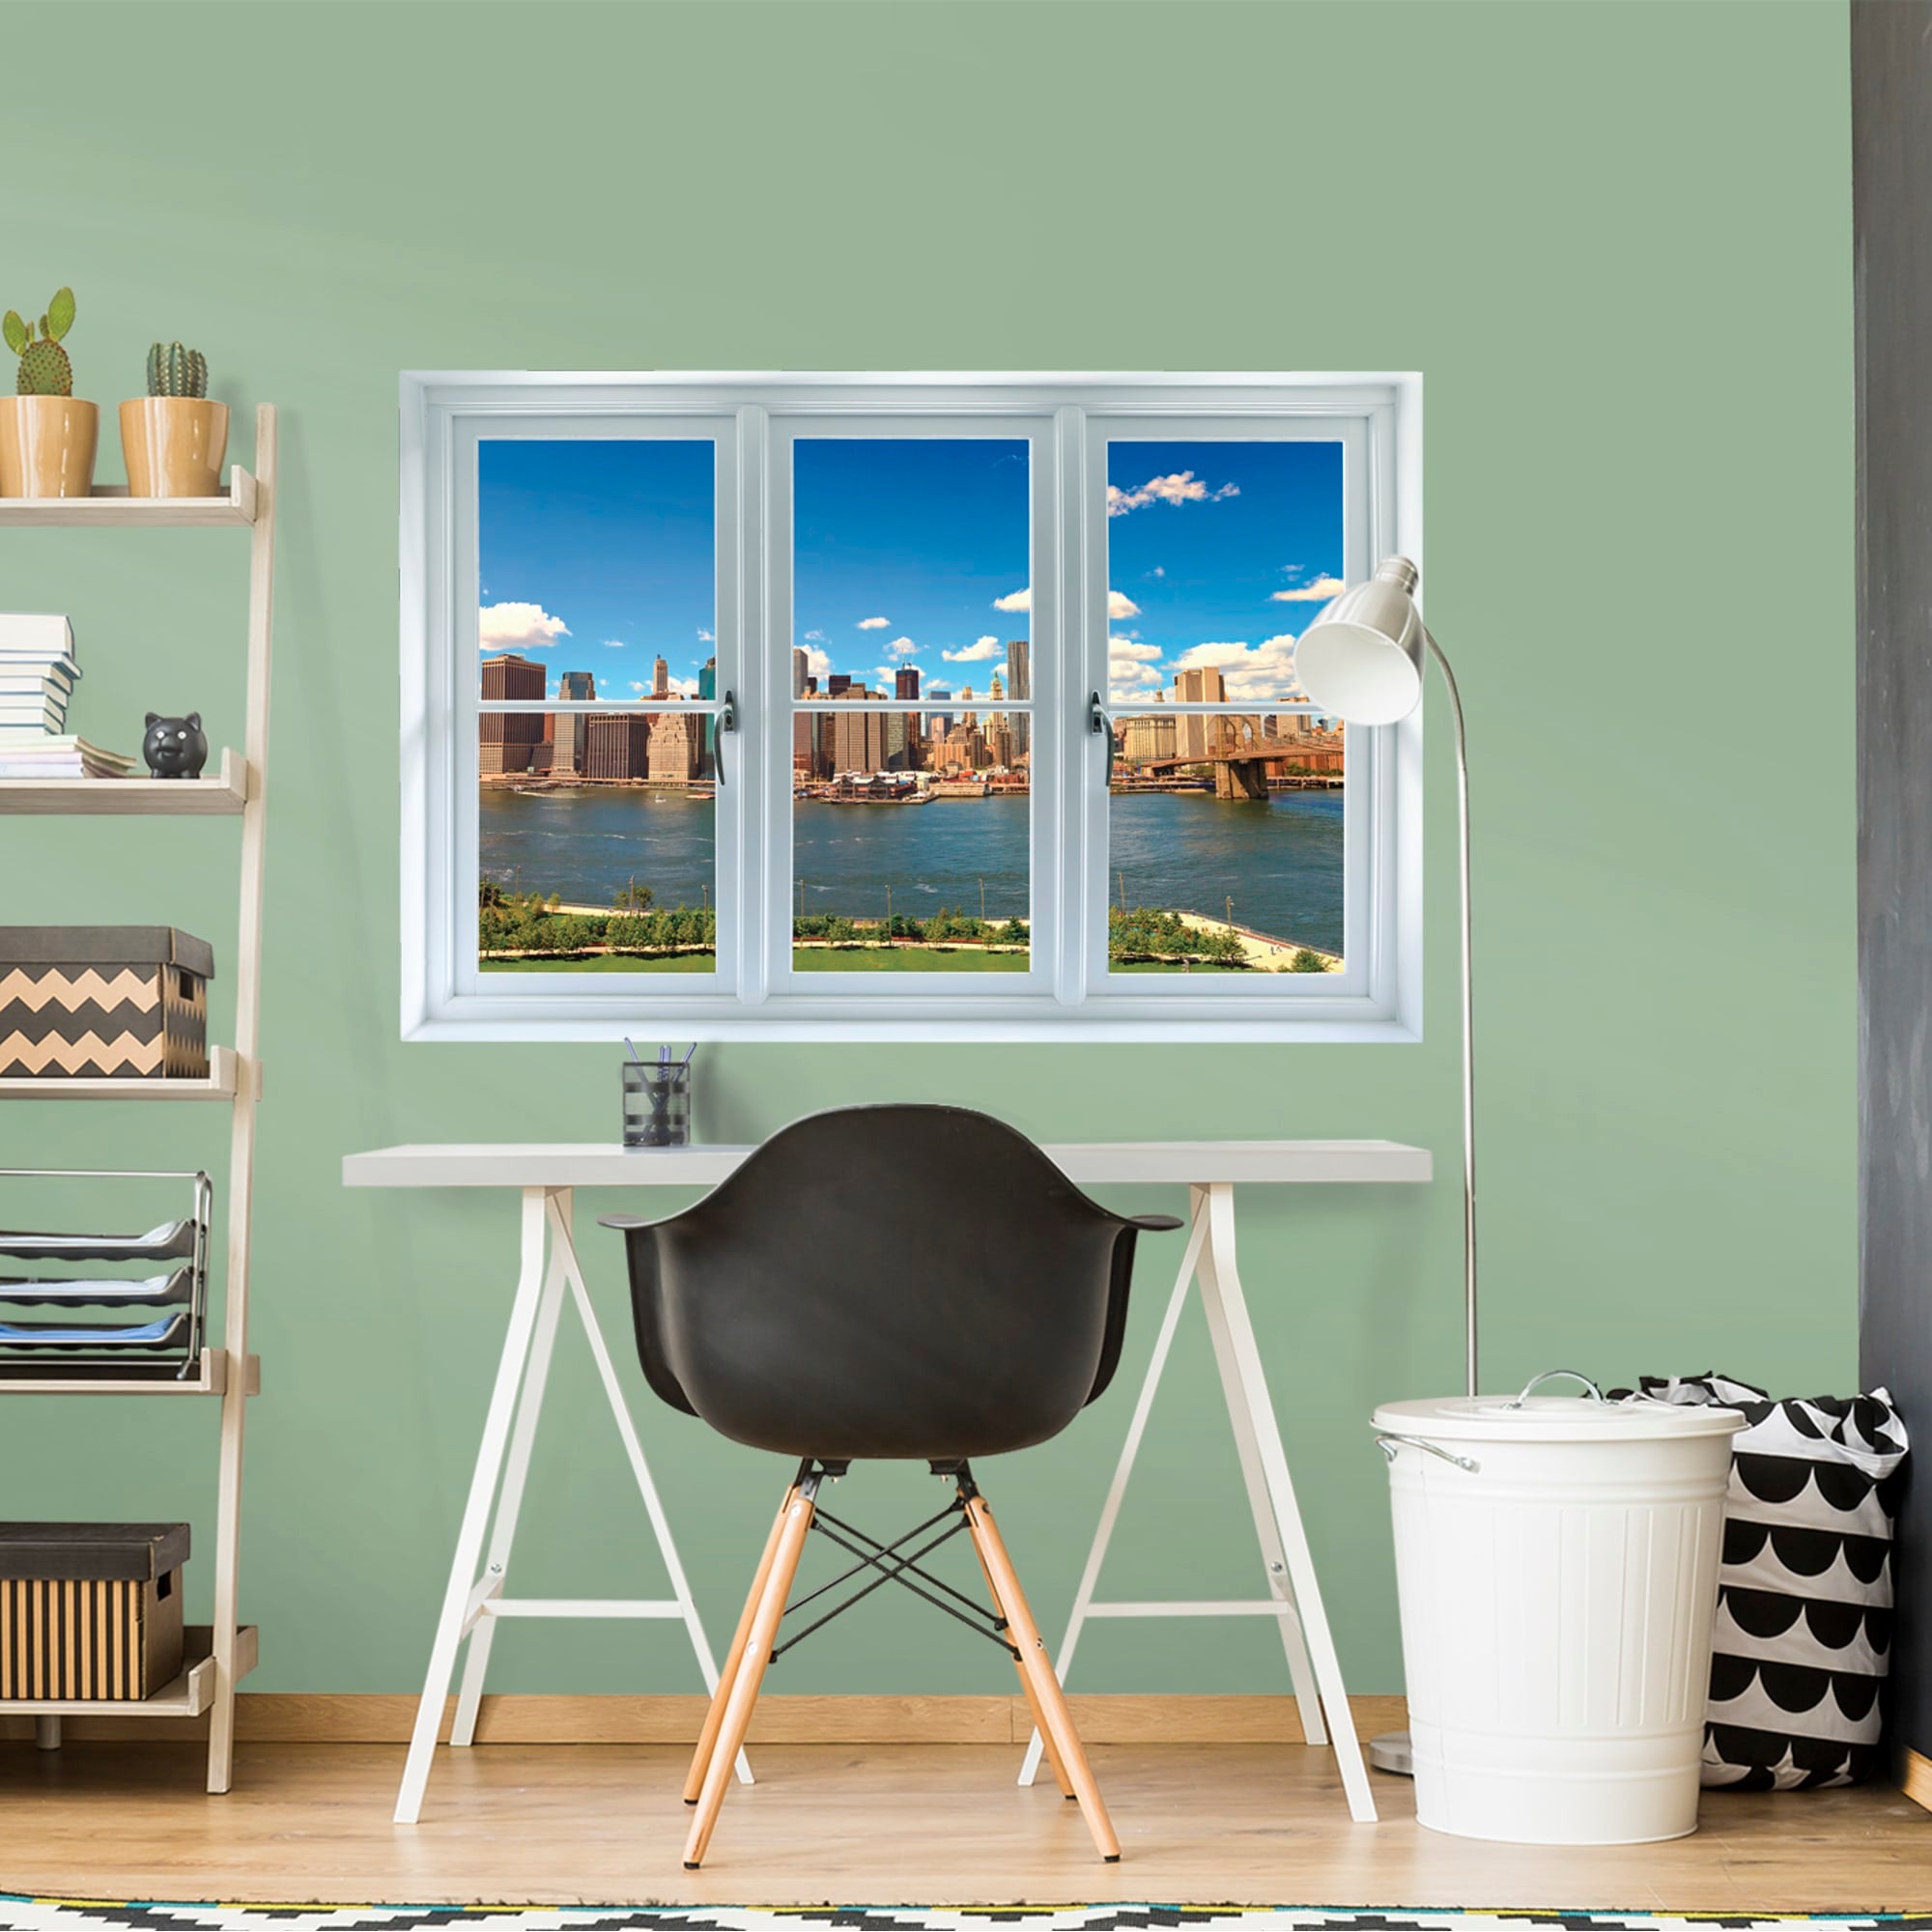 Instant Window: New York Skyline - Removable Wall Graphic 51.0"W x 34.0"H by Fathead | Vinyl